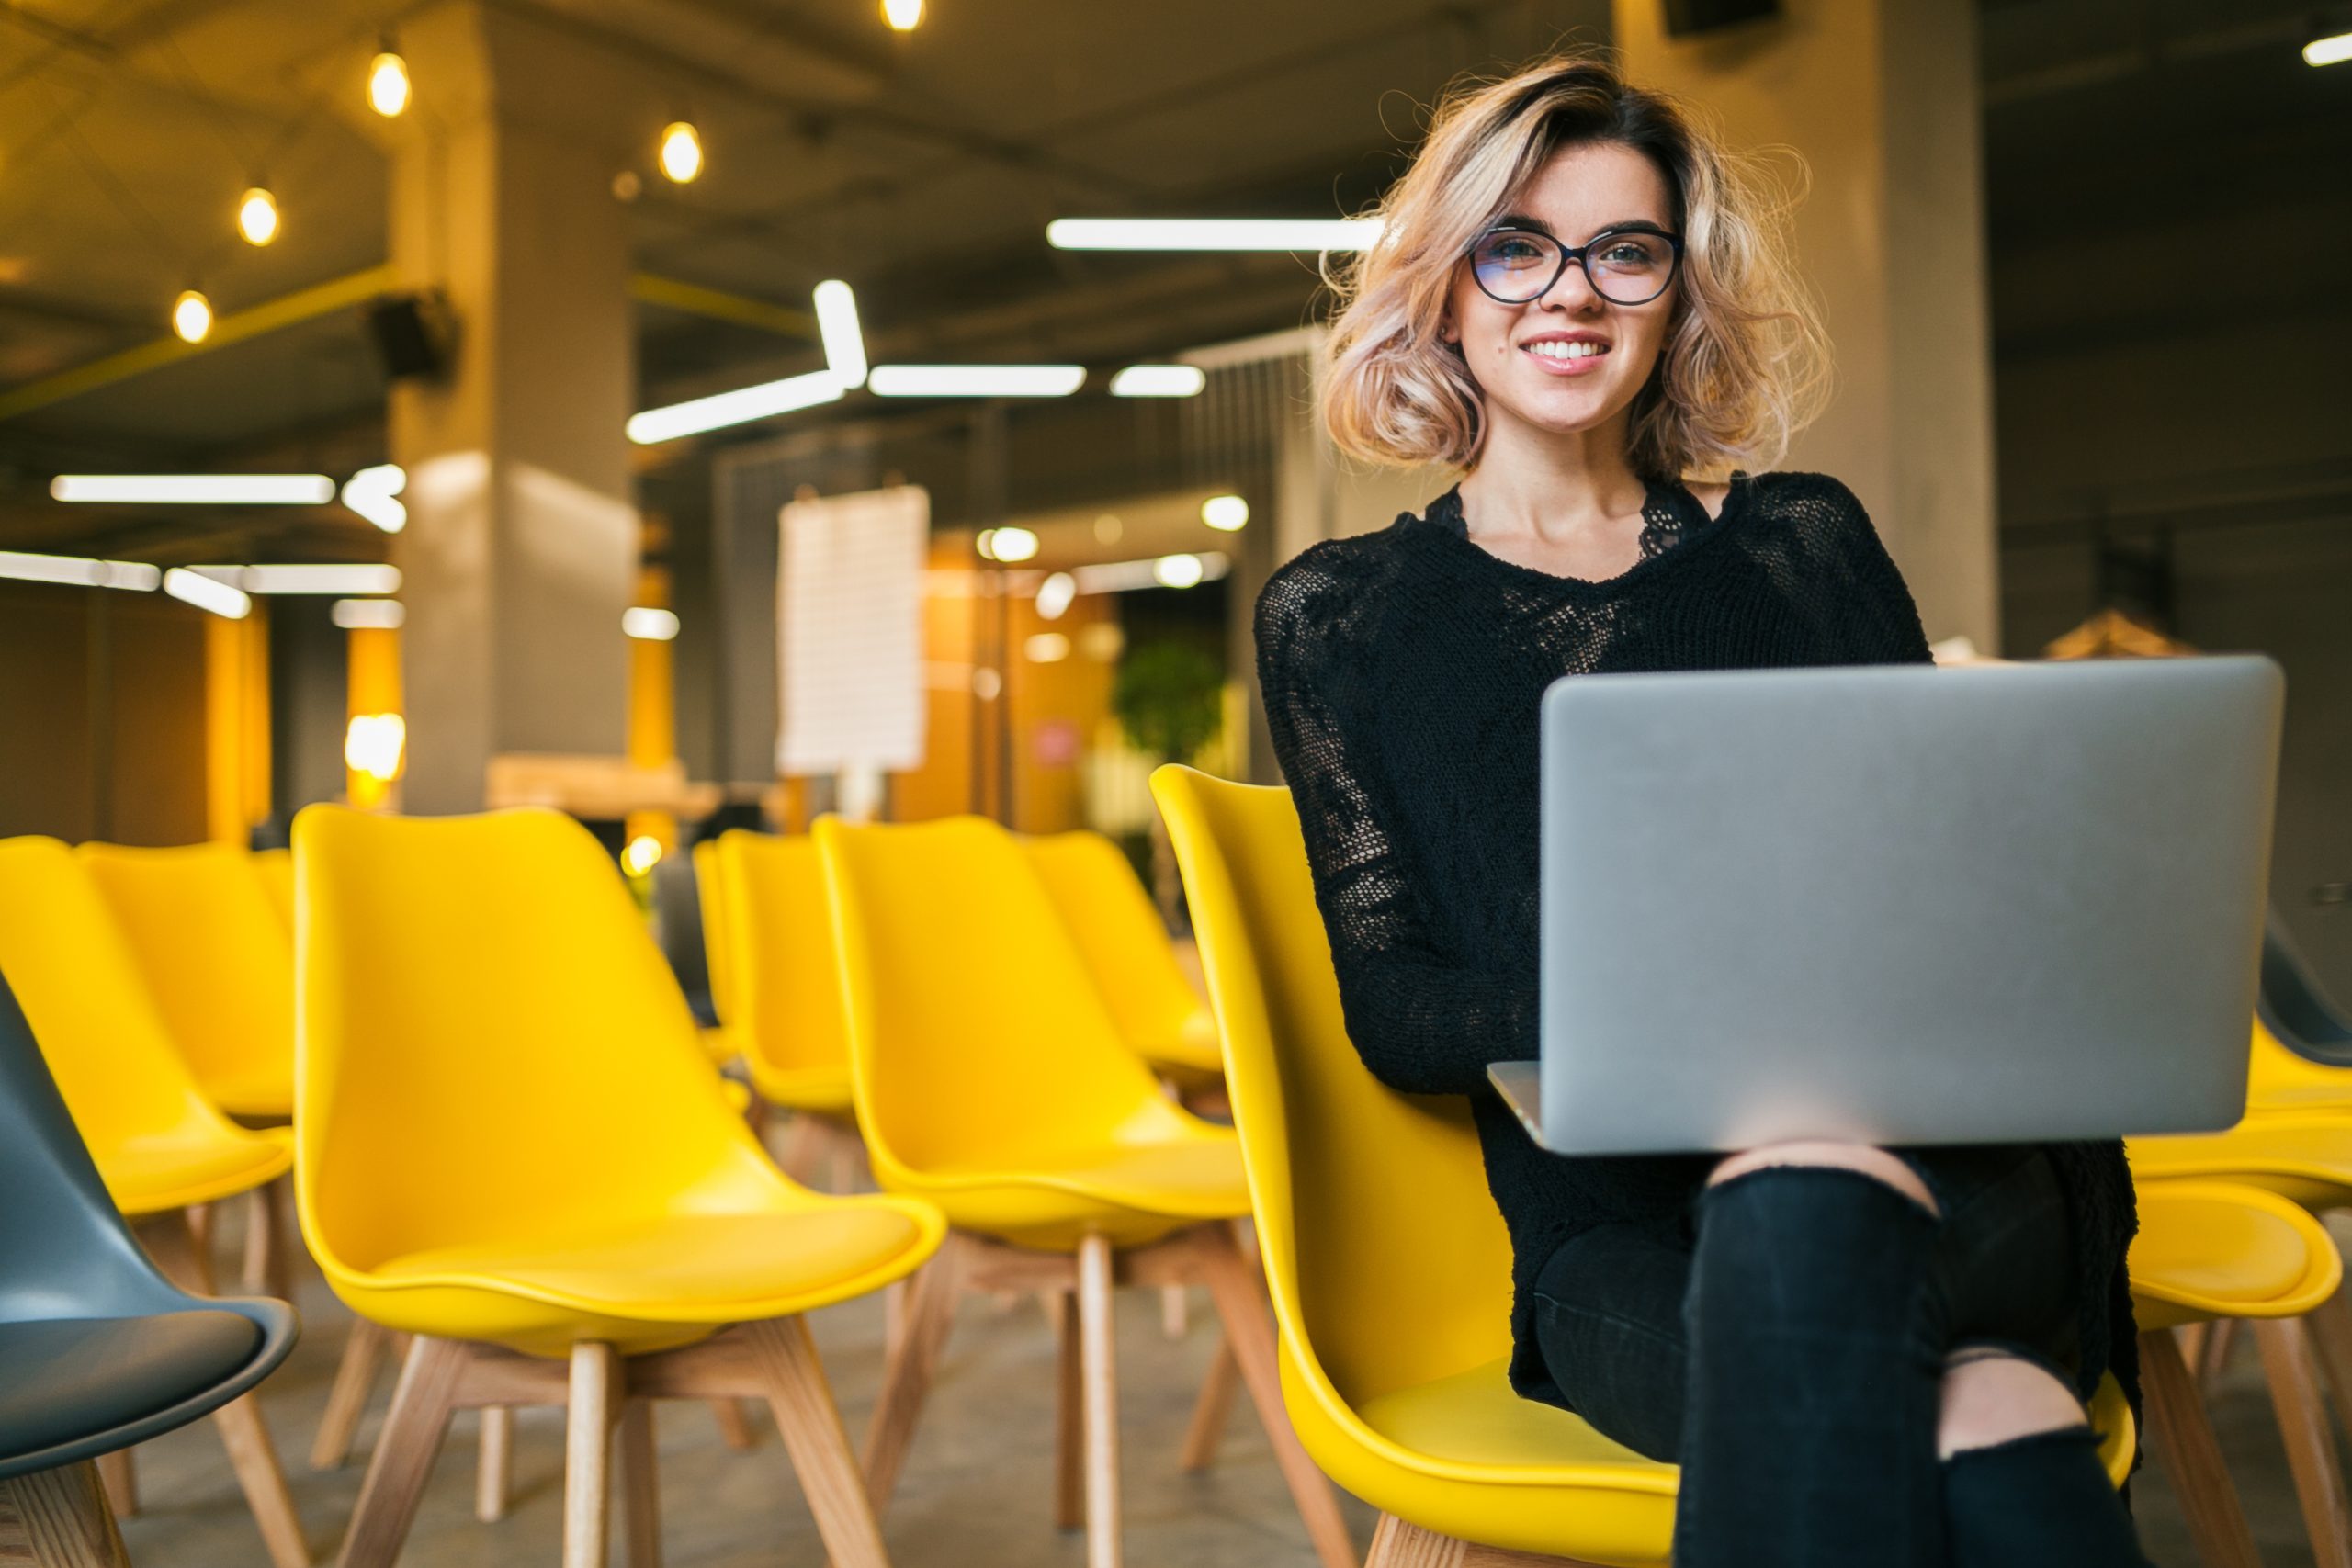 portrait of young attractive woman sitting in lecture hall, working on laptop, wearing glasses, classroom with many yellow chairs, student learning, education online, freelancer, smiling, stylish